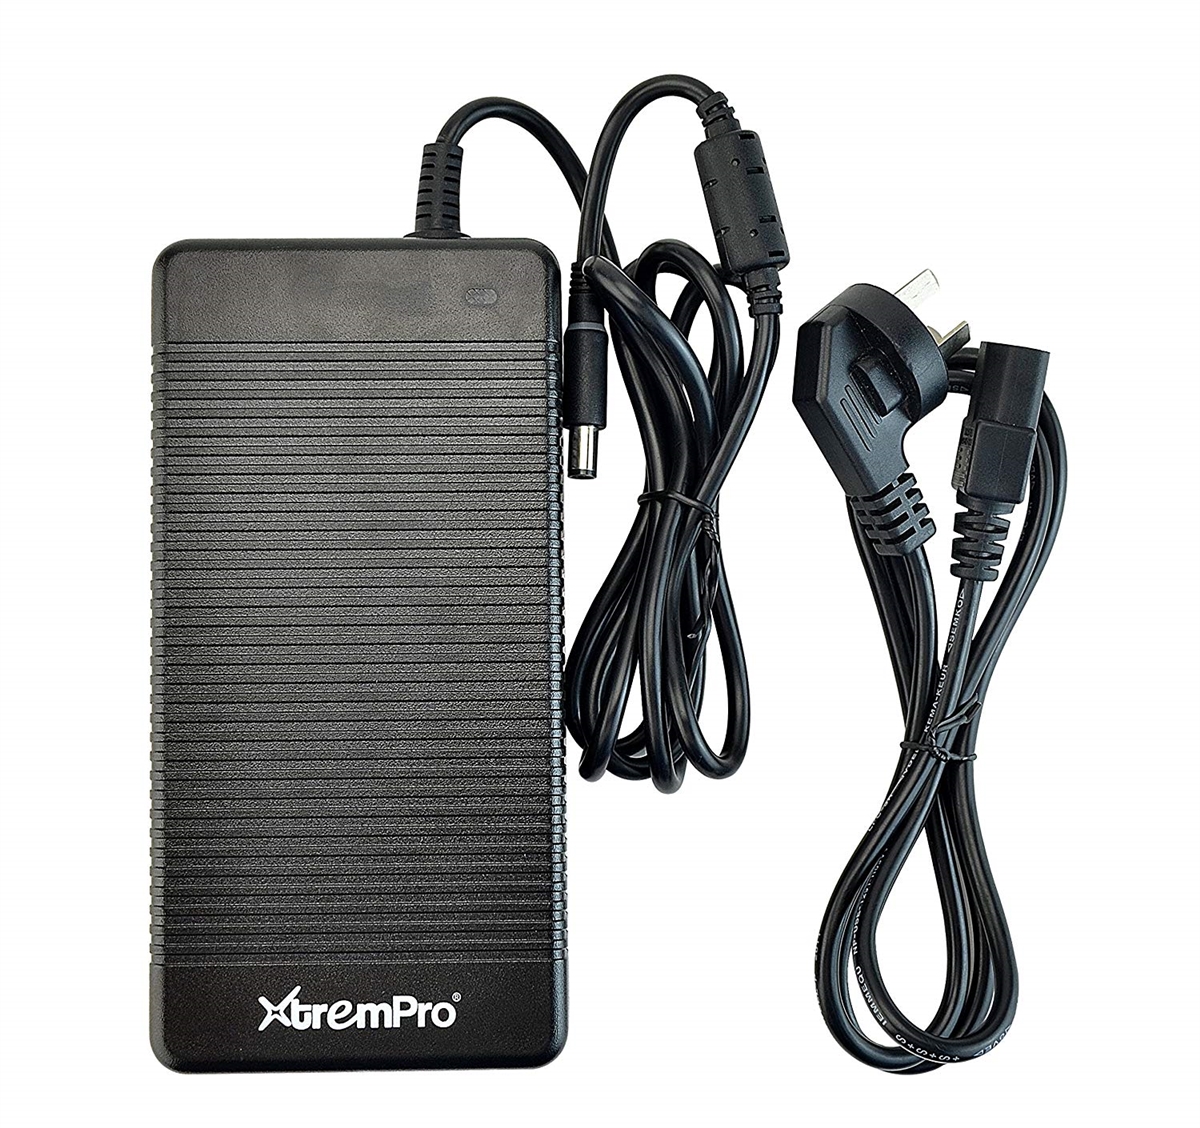 Xtrempro PC Gaming Power AC Adapter with Power Supply 10 ft. Cord 19.5V 11.8A 230W 100-240V for DELL ASUS